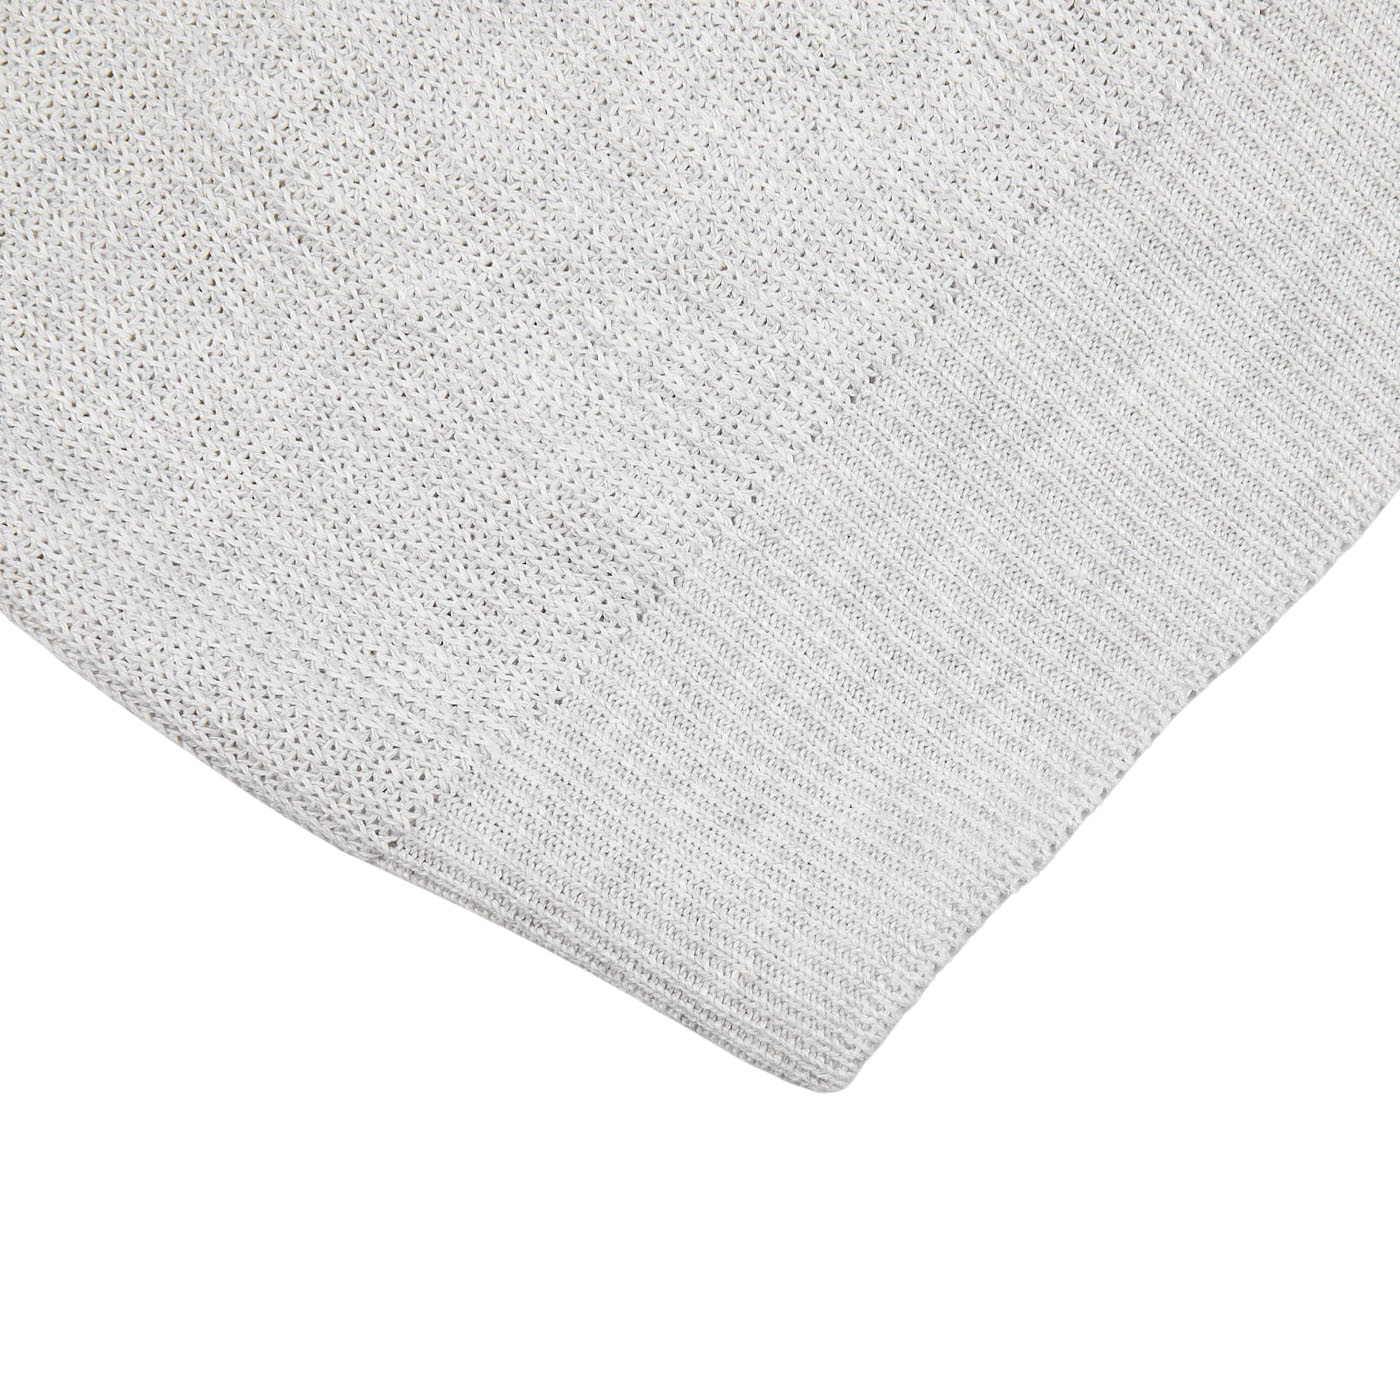 A Light Grey Linen Cotton T-shirt by Gran Sasso on a white surface.